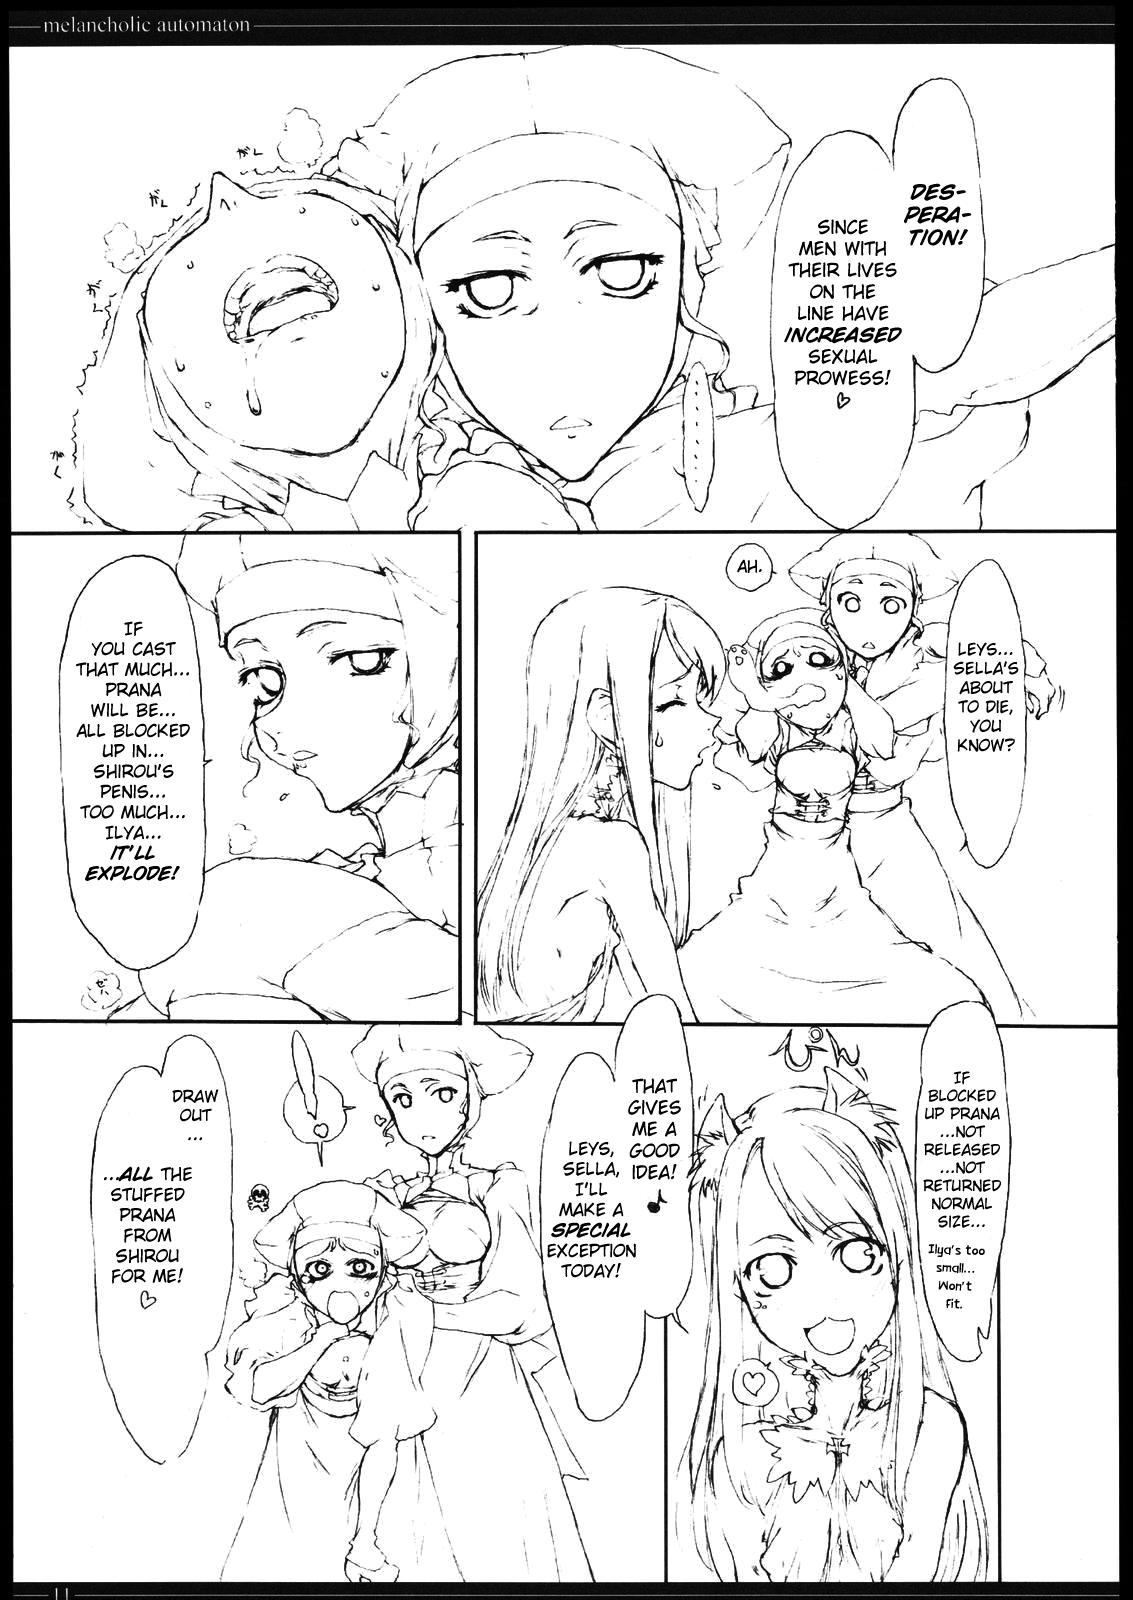 Amature Porn Melancholic Automaton - One day at the castle of Einzbern - Fate stay night Amateur Xxx - Page 10